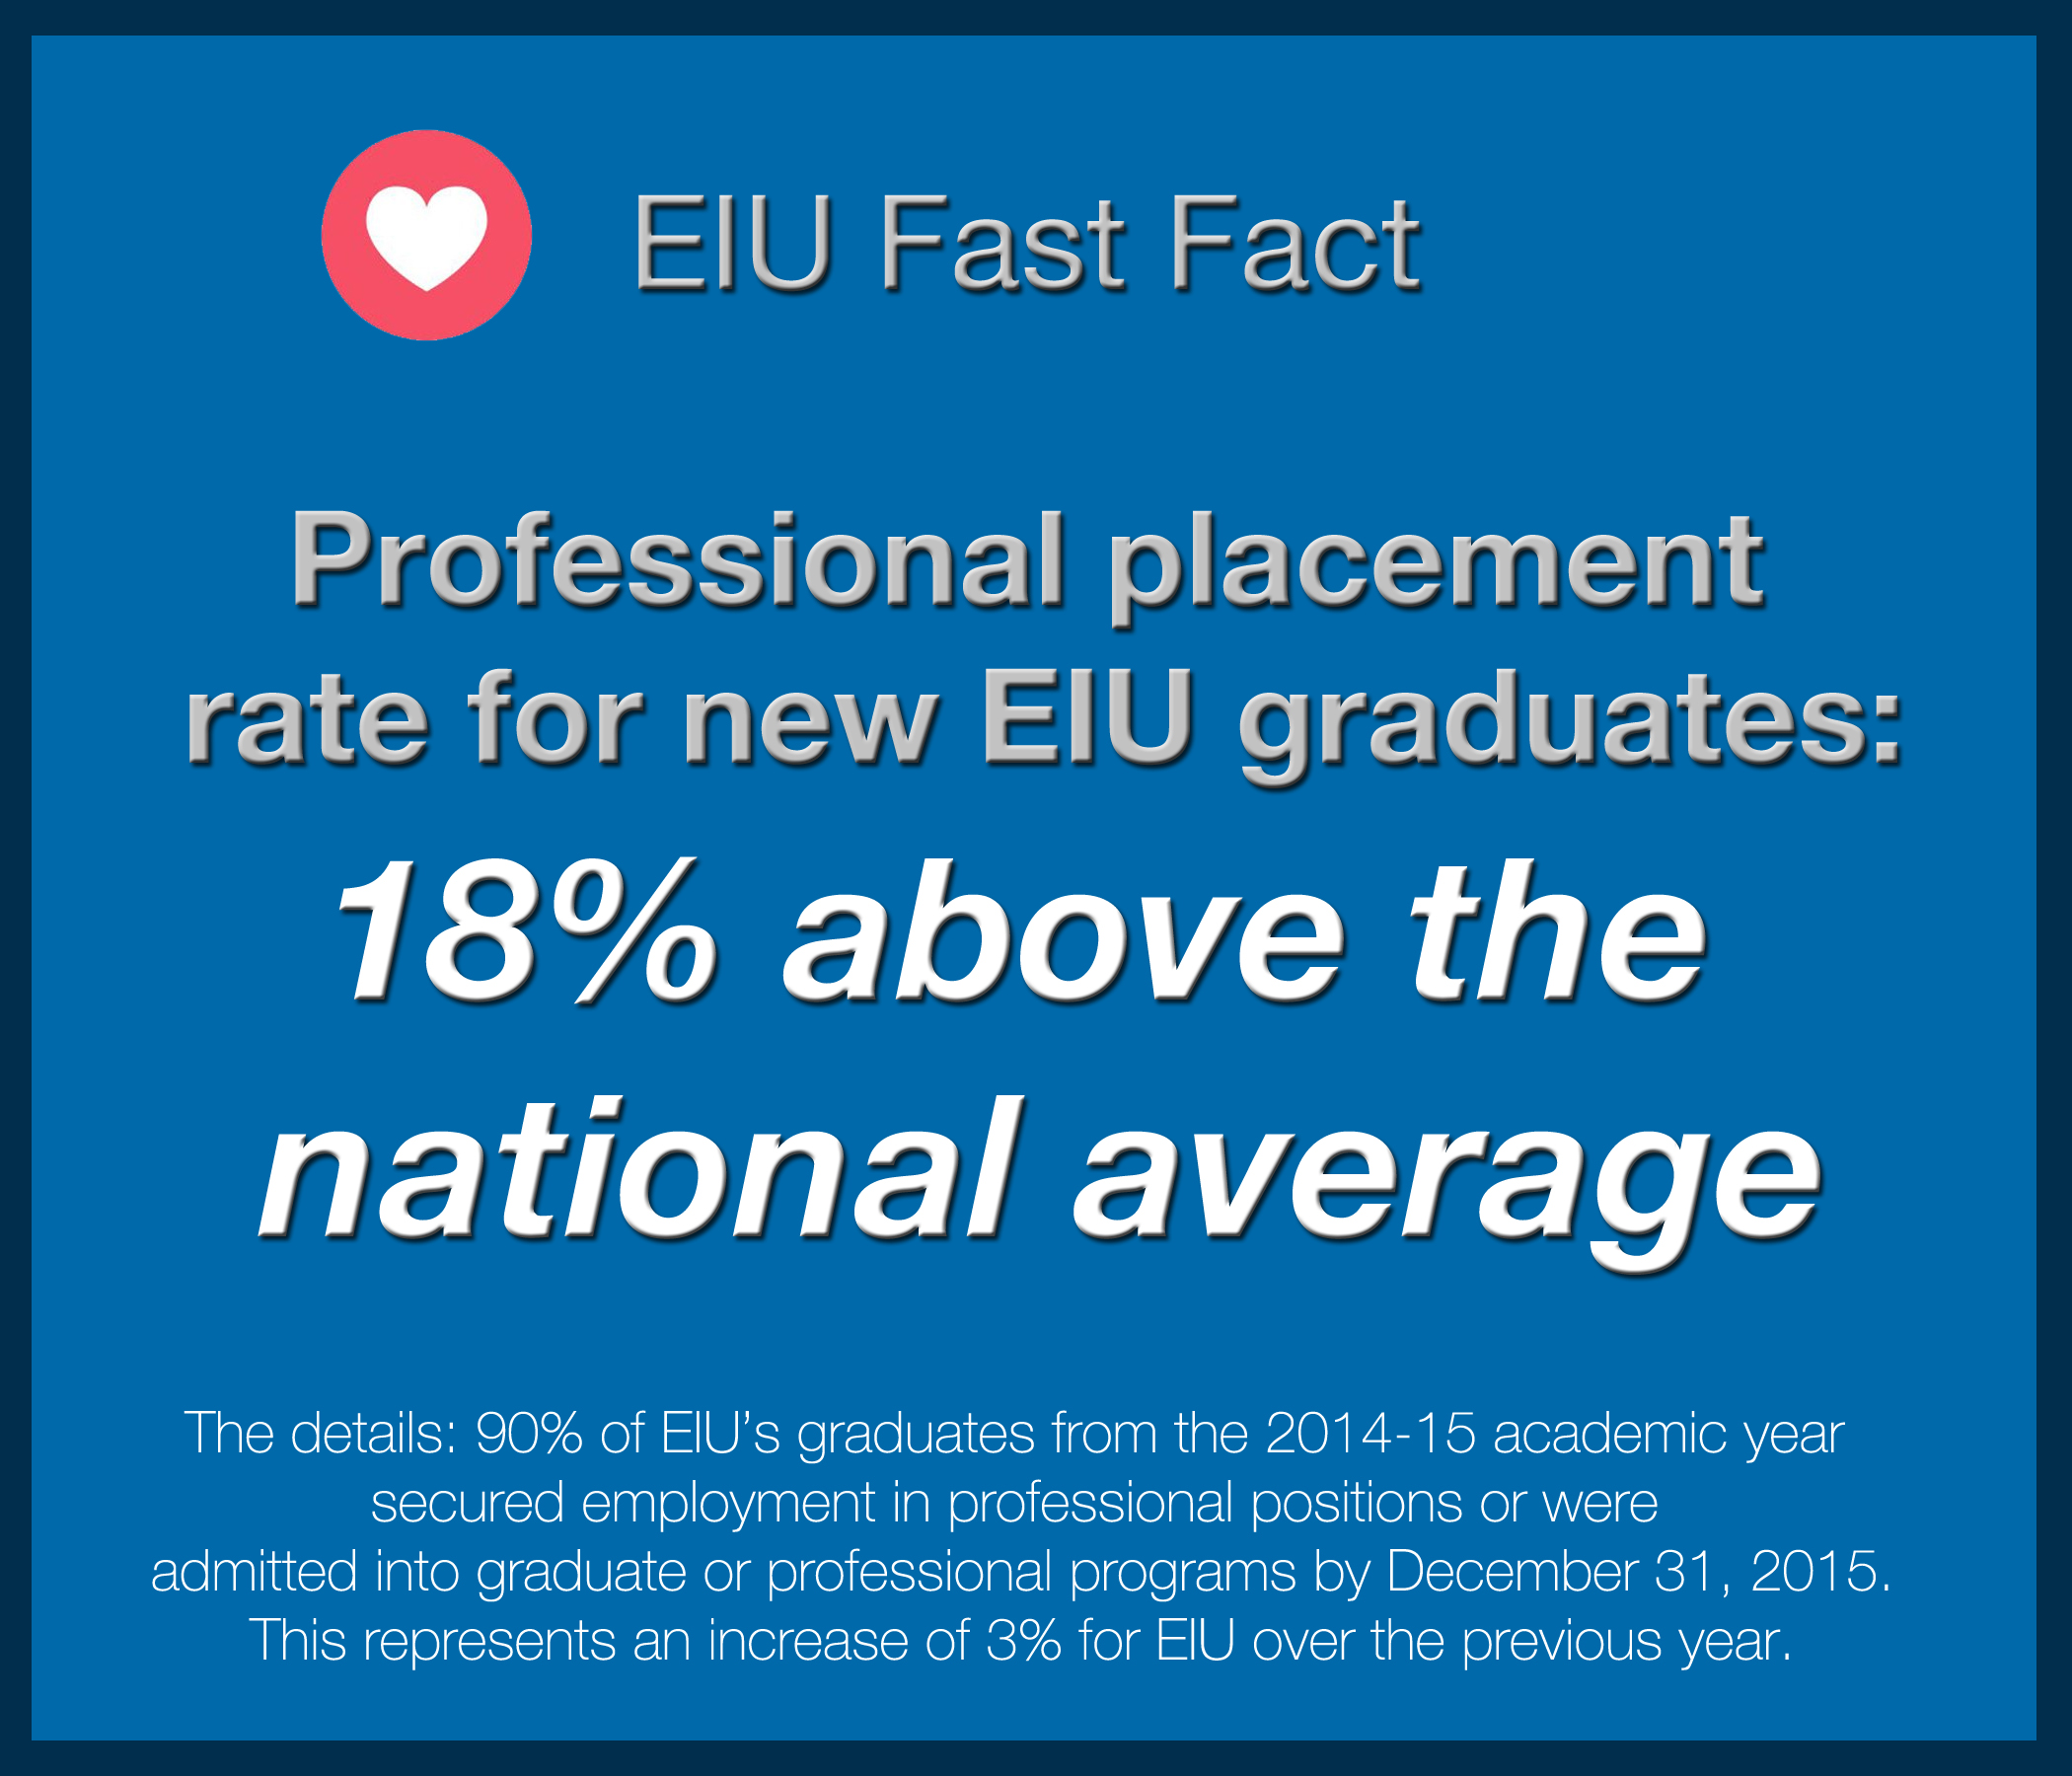 EIU's overall 6-month job placement rate for new graduates is 18% above the national average.